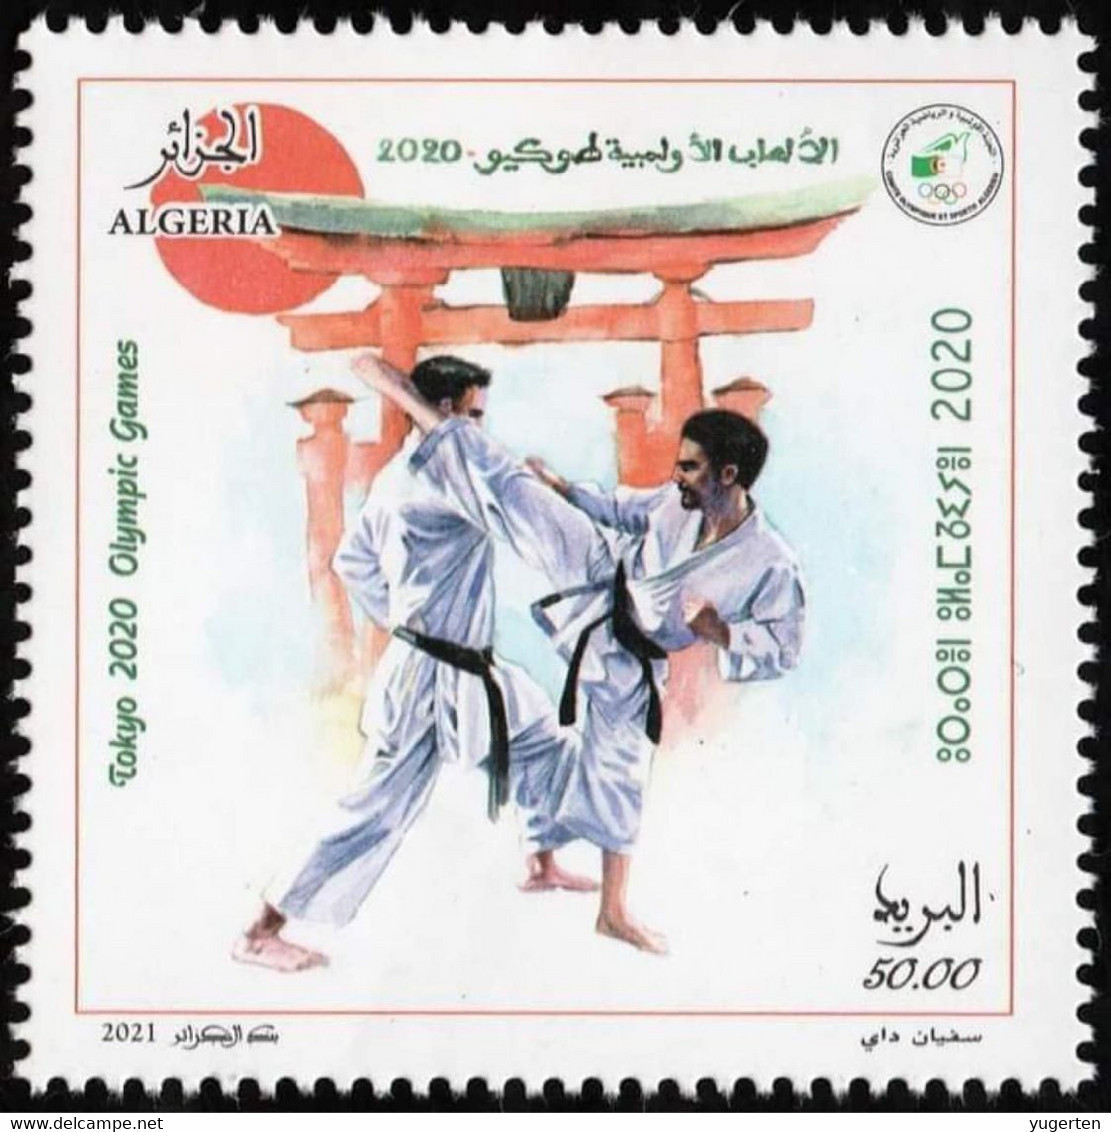 ALGERIA 2021 - 1 V - MNH - Karate - Olympic Games Tokyo JO Olympics Olympische Spiele Jeux Olympiques Japan - Non Classés